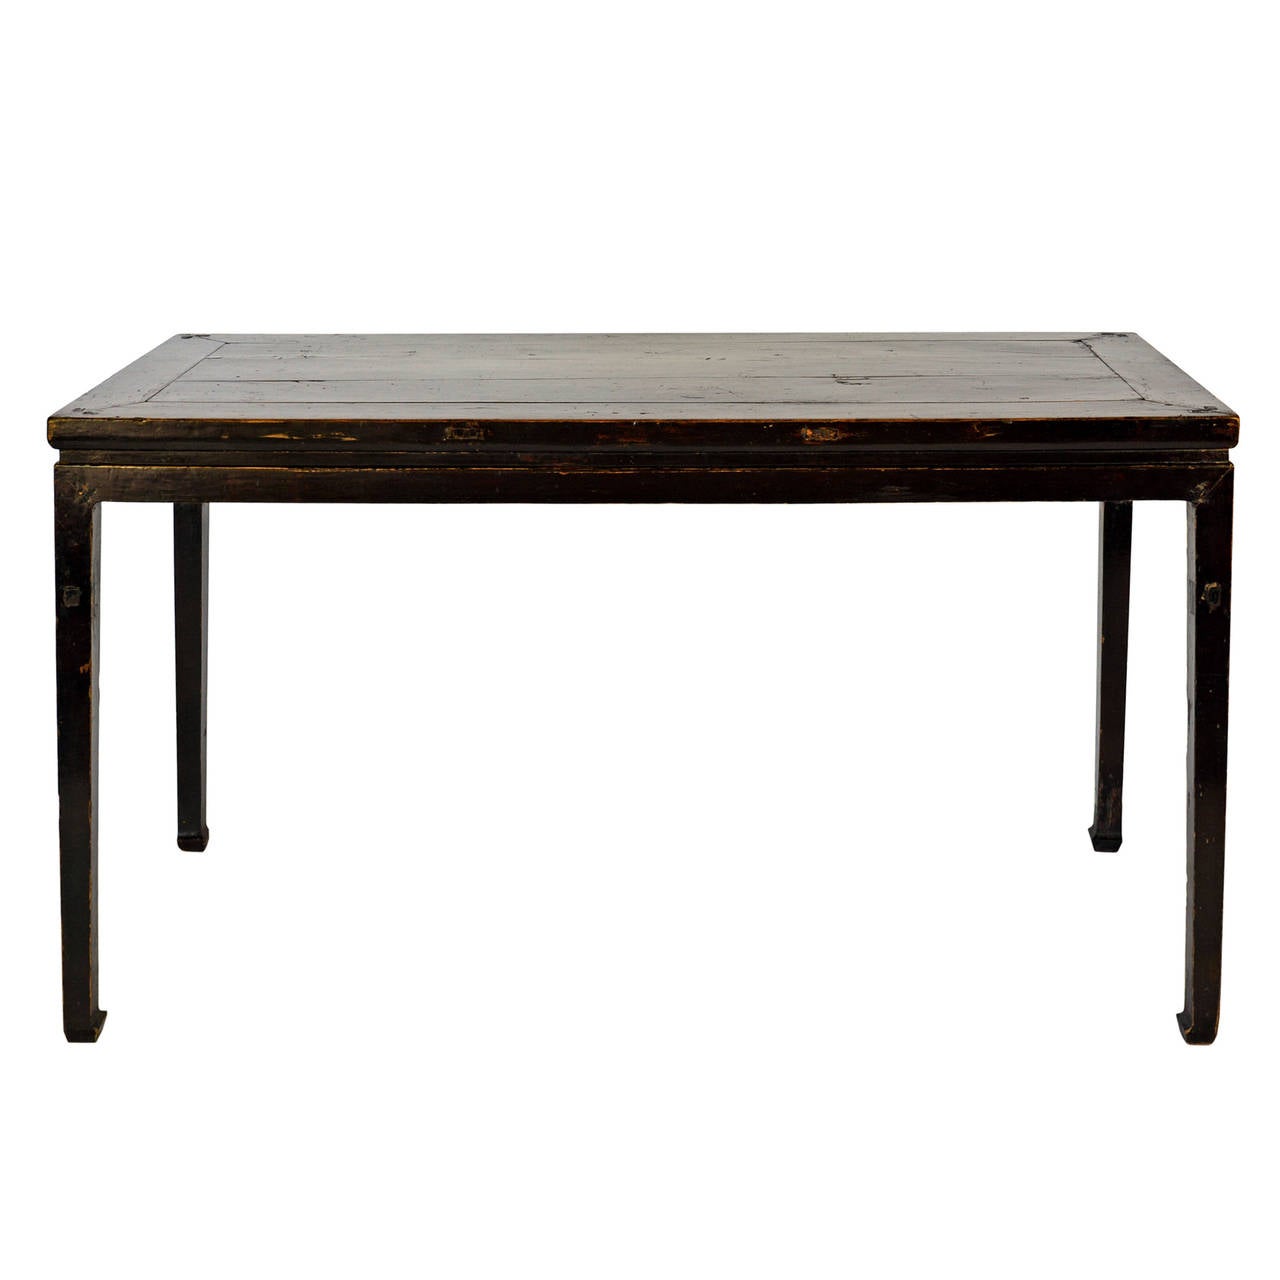 Painting table with its original black lacquer finish, constructed with standard mitered frame members with a tongue and grooved floating panel. The legs are straight and end in horse hoof feet. A painting table is considered furniture of the elite